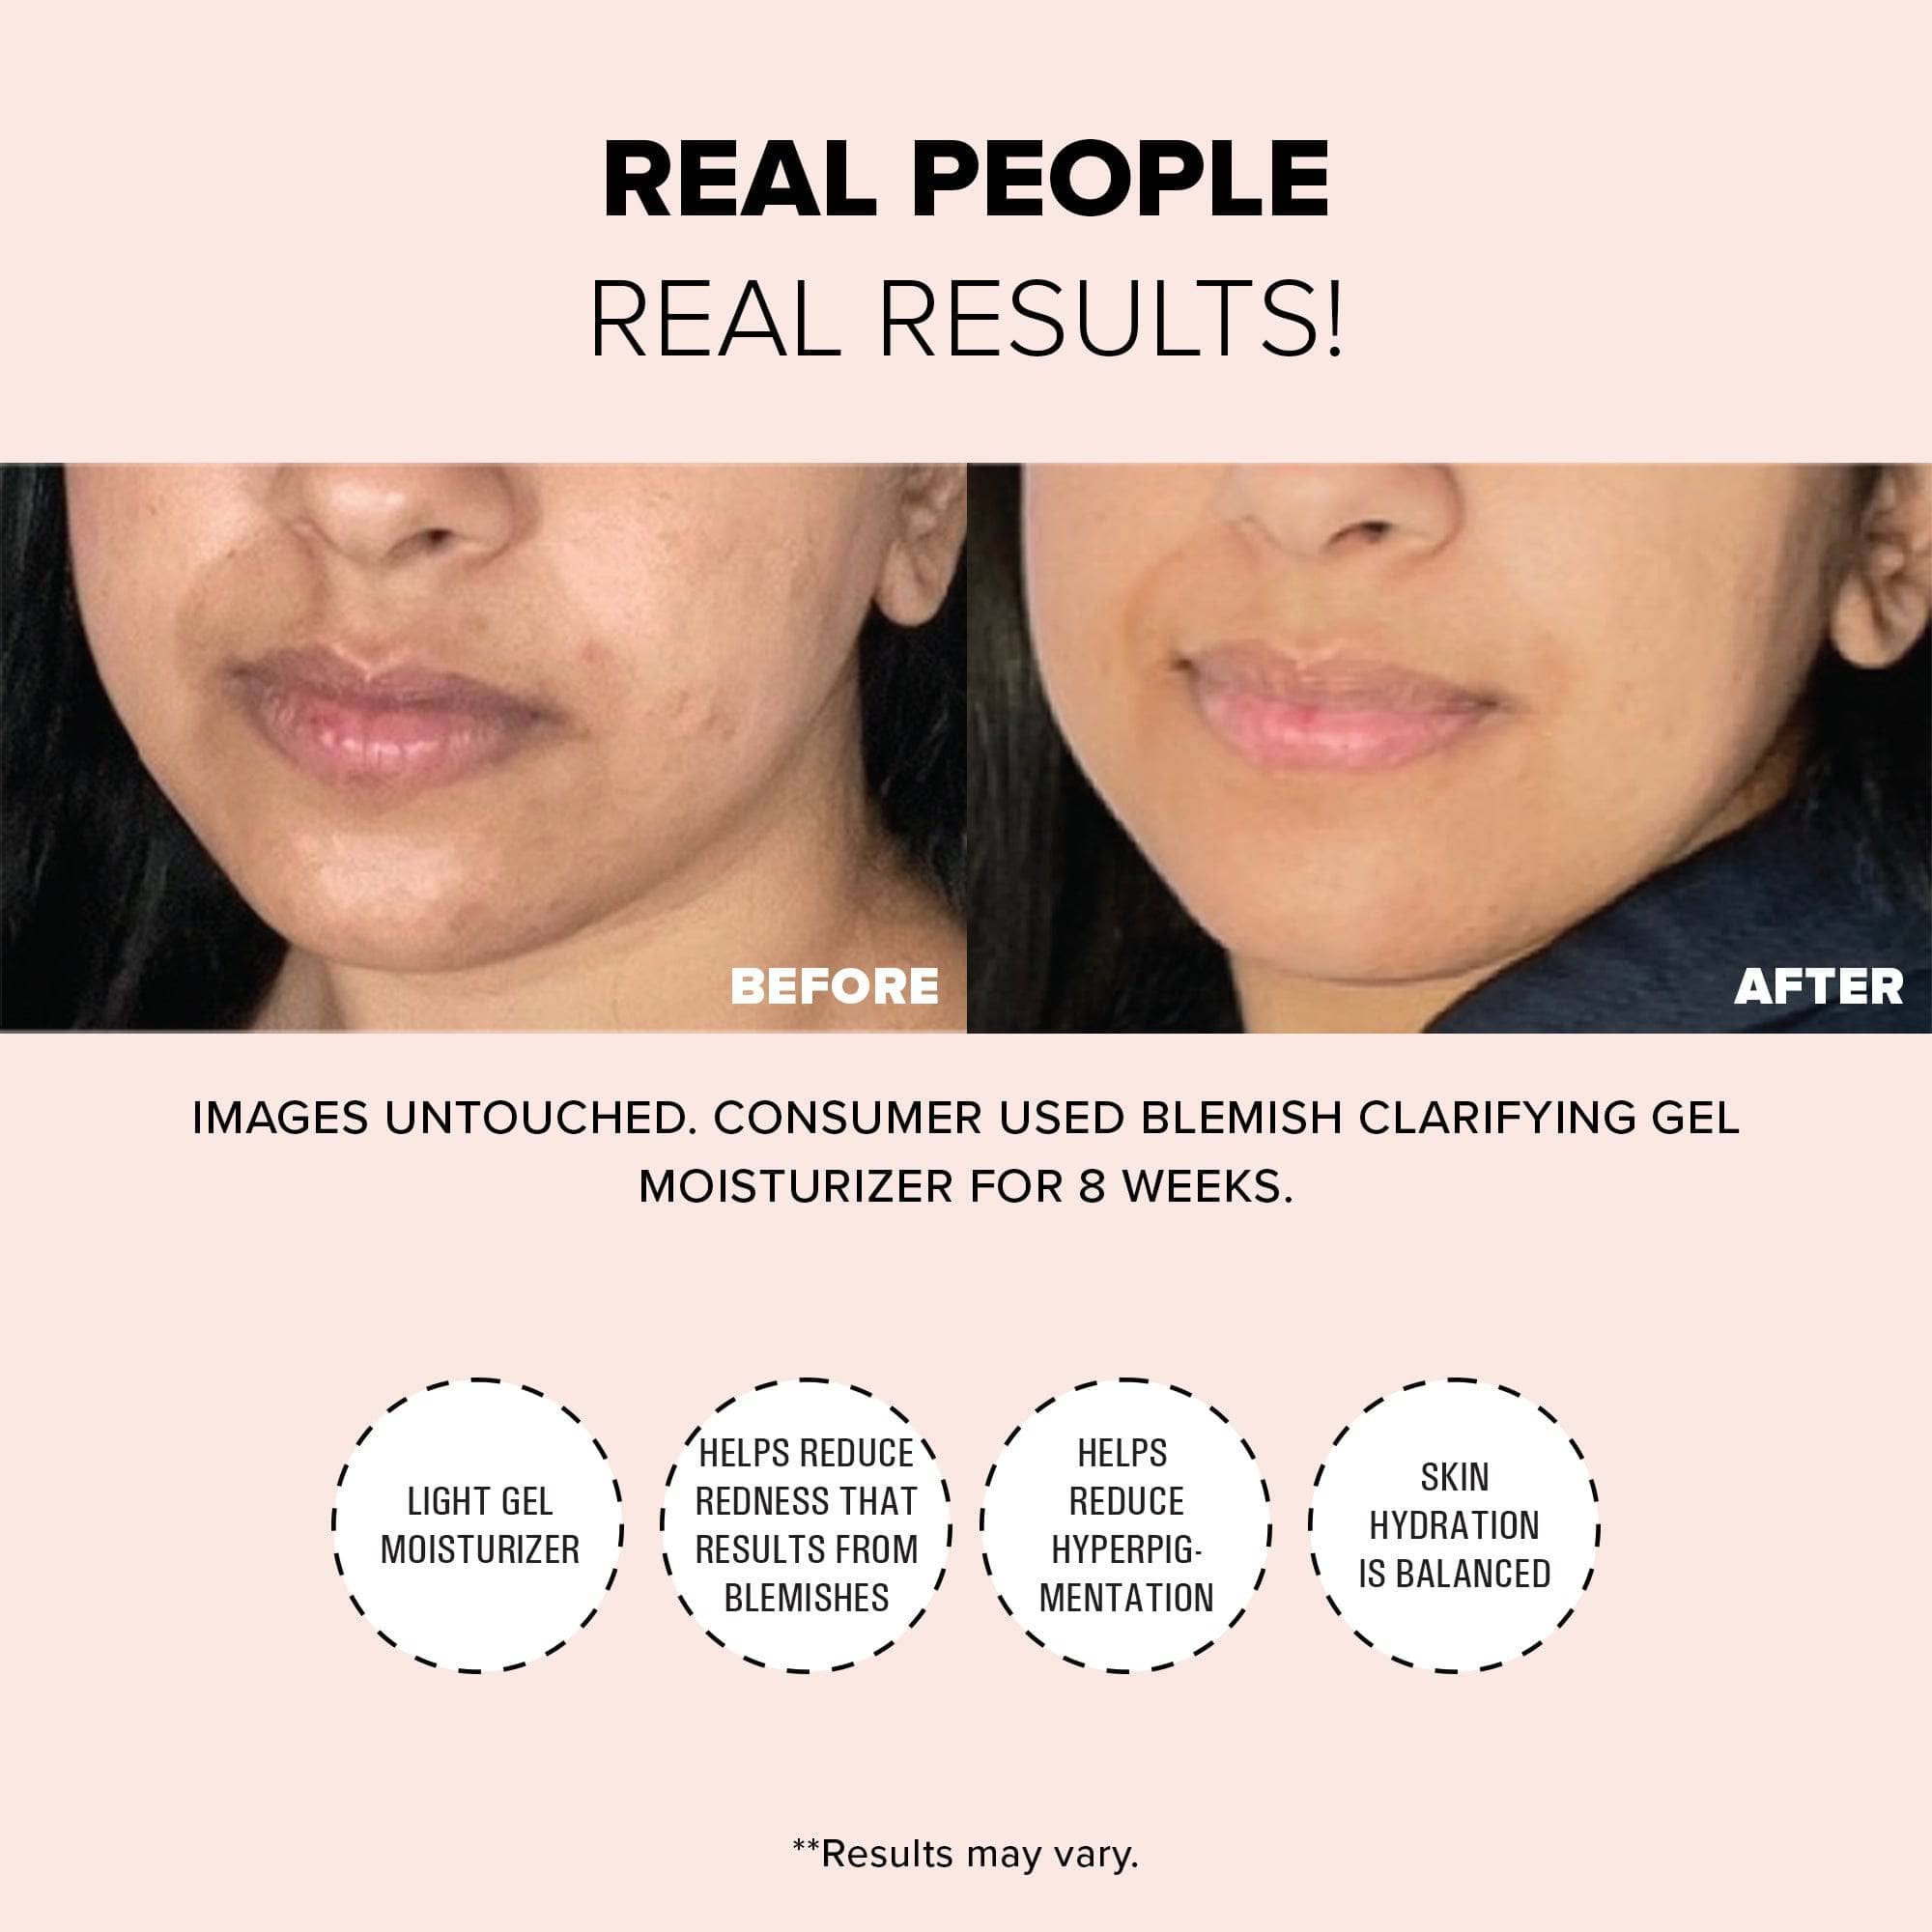 Real people, real results before and after using Nudeskin Blemish Clarifying Gel Moisturizer 